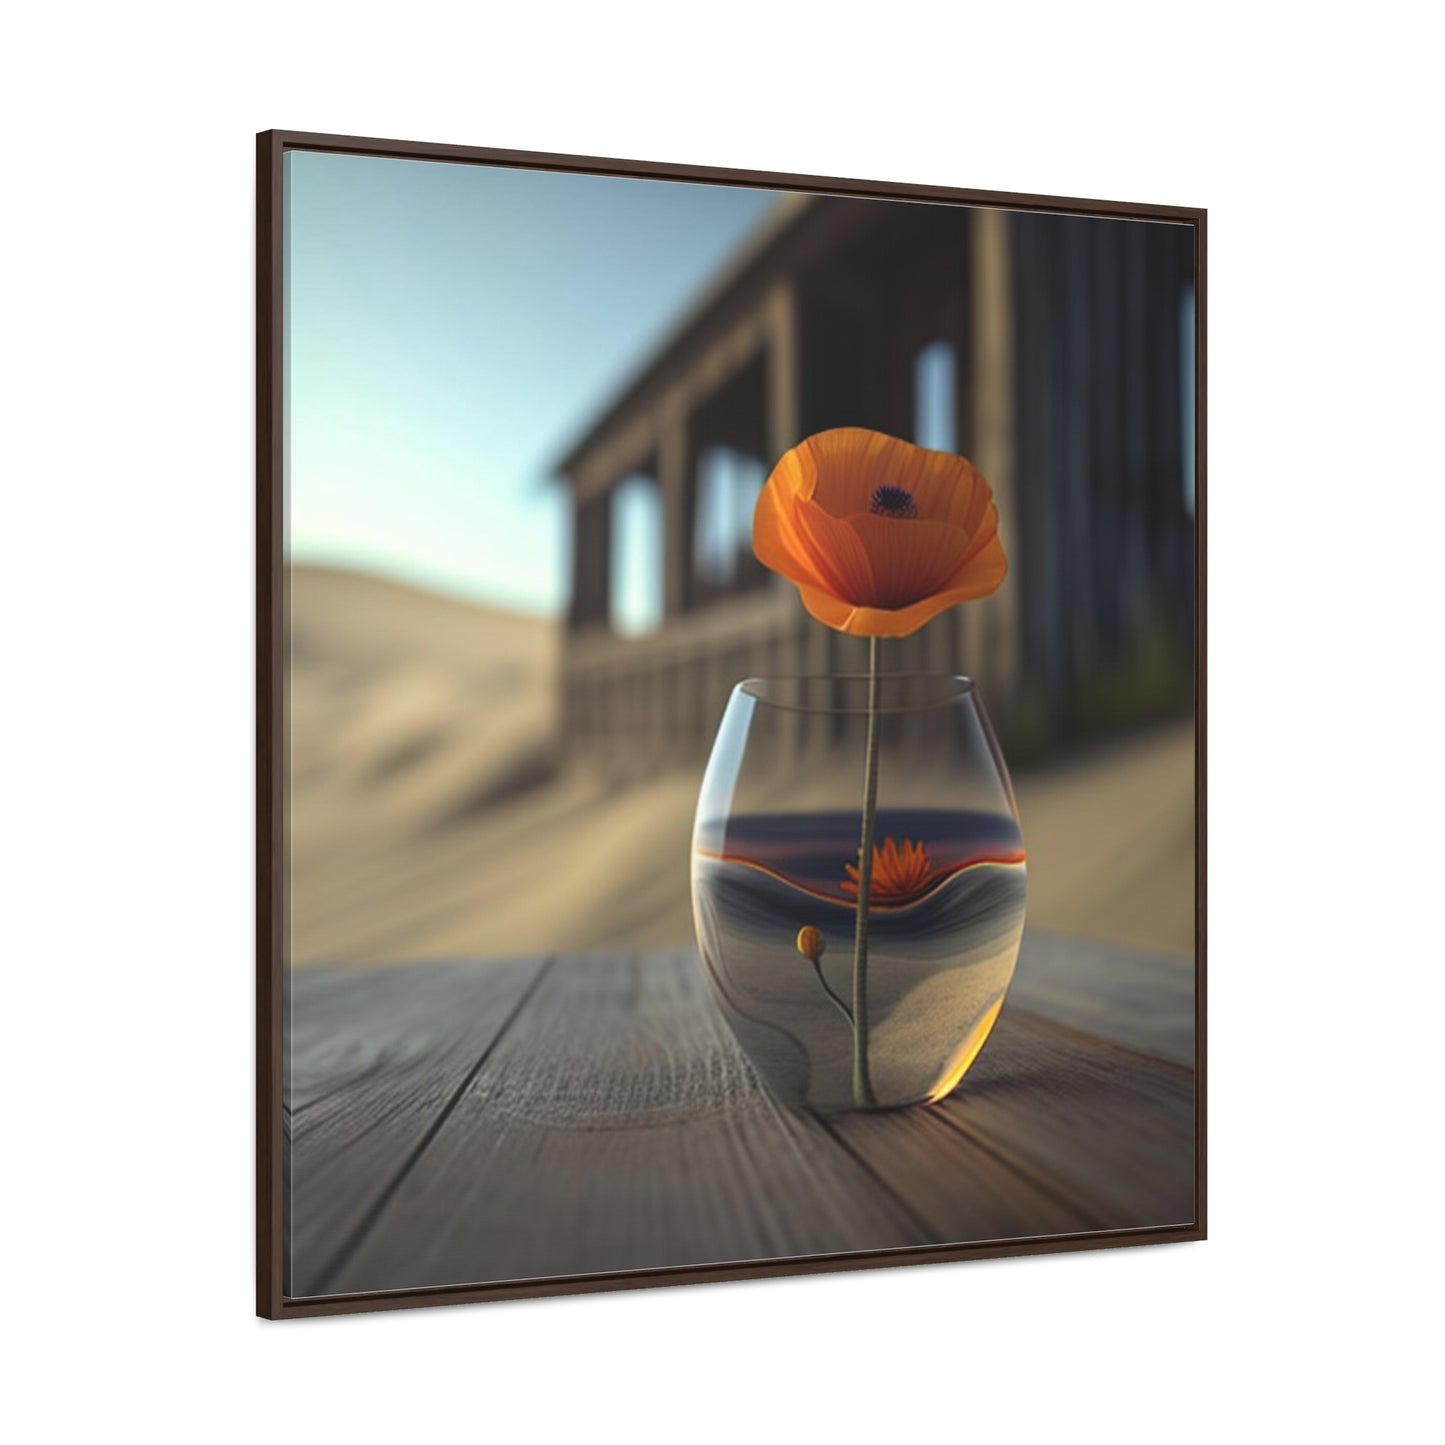 Gallery Canvas Wraps, Square Frame Poppy in a Glass Vase 4